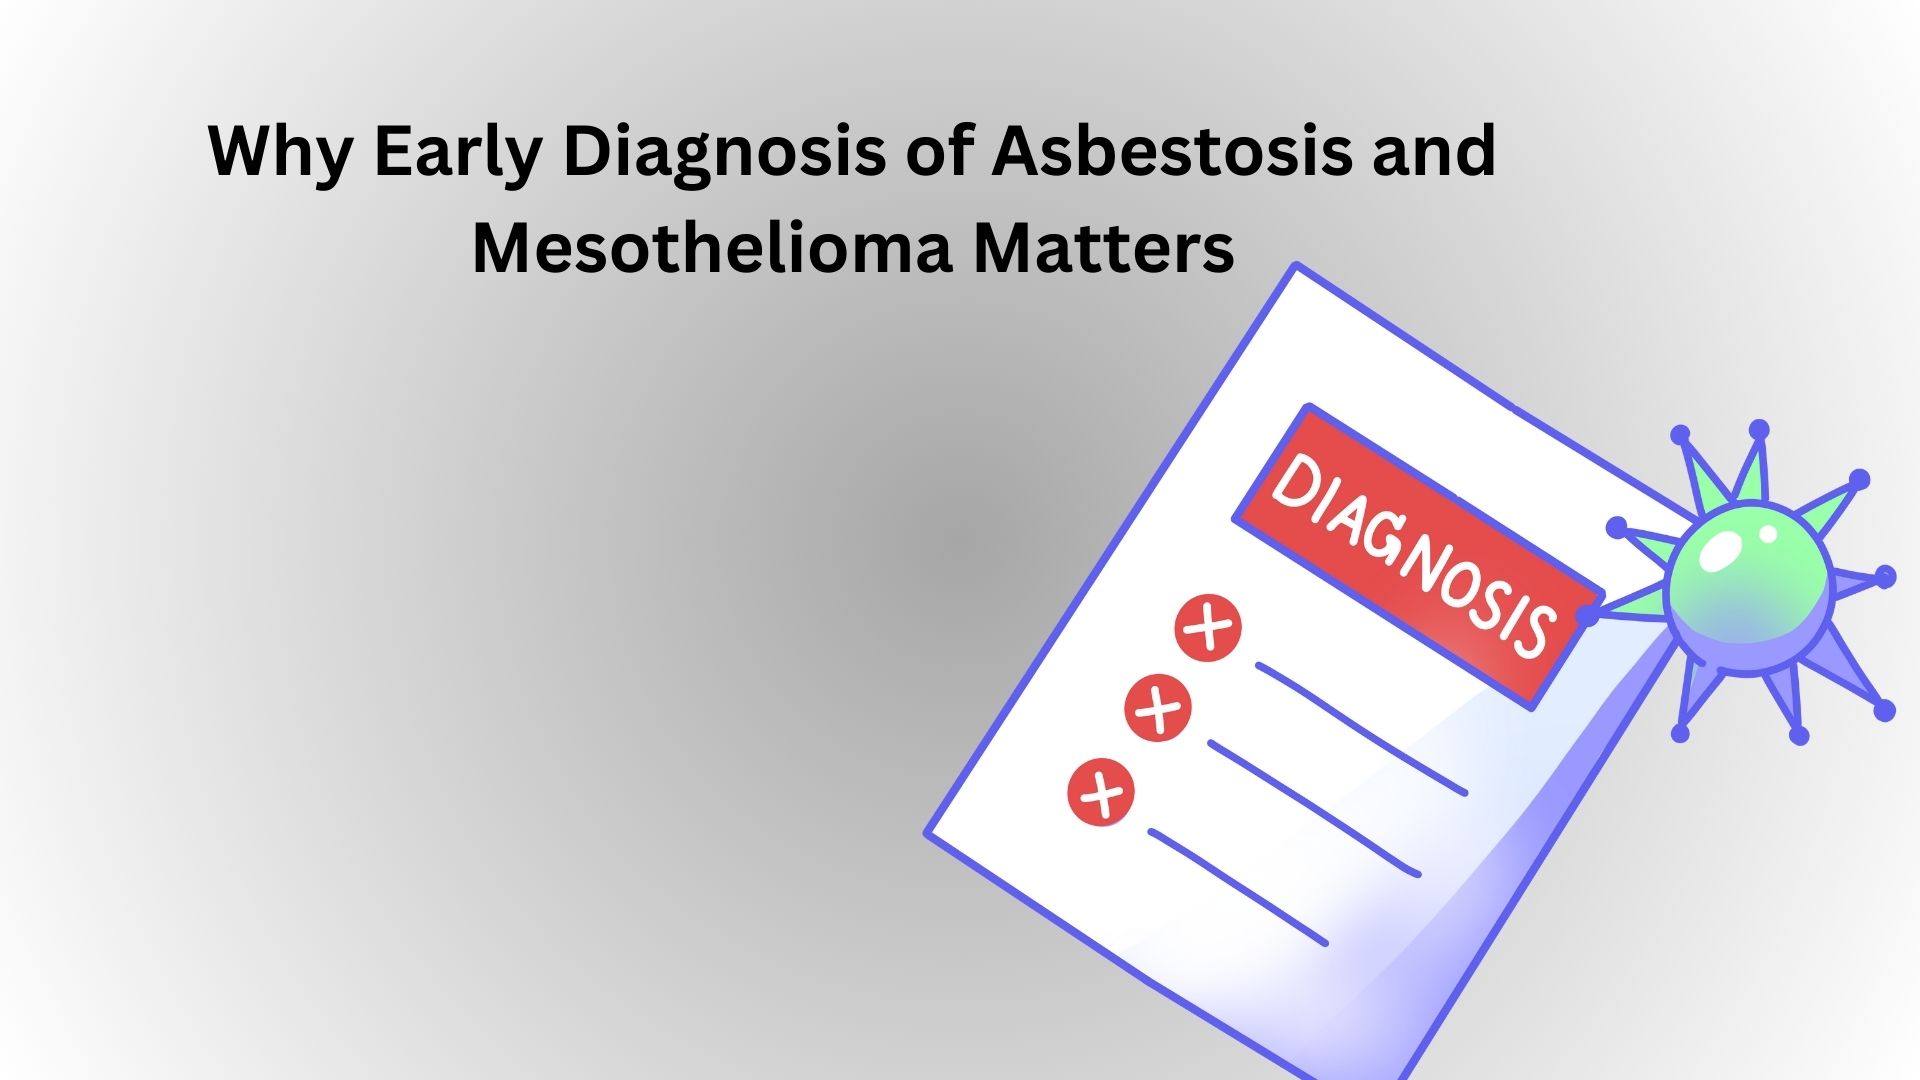 Why Early Diagnosis of Asbestosis and Mesothelioma Matters